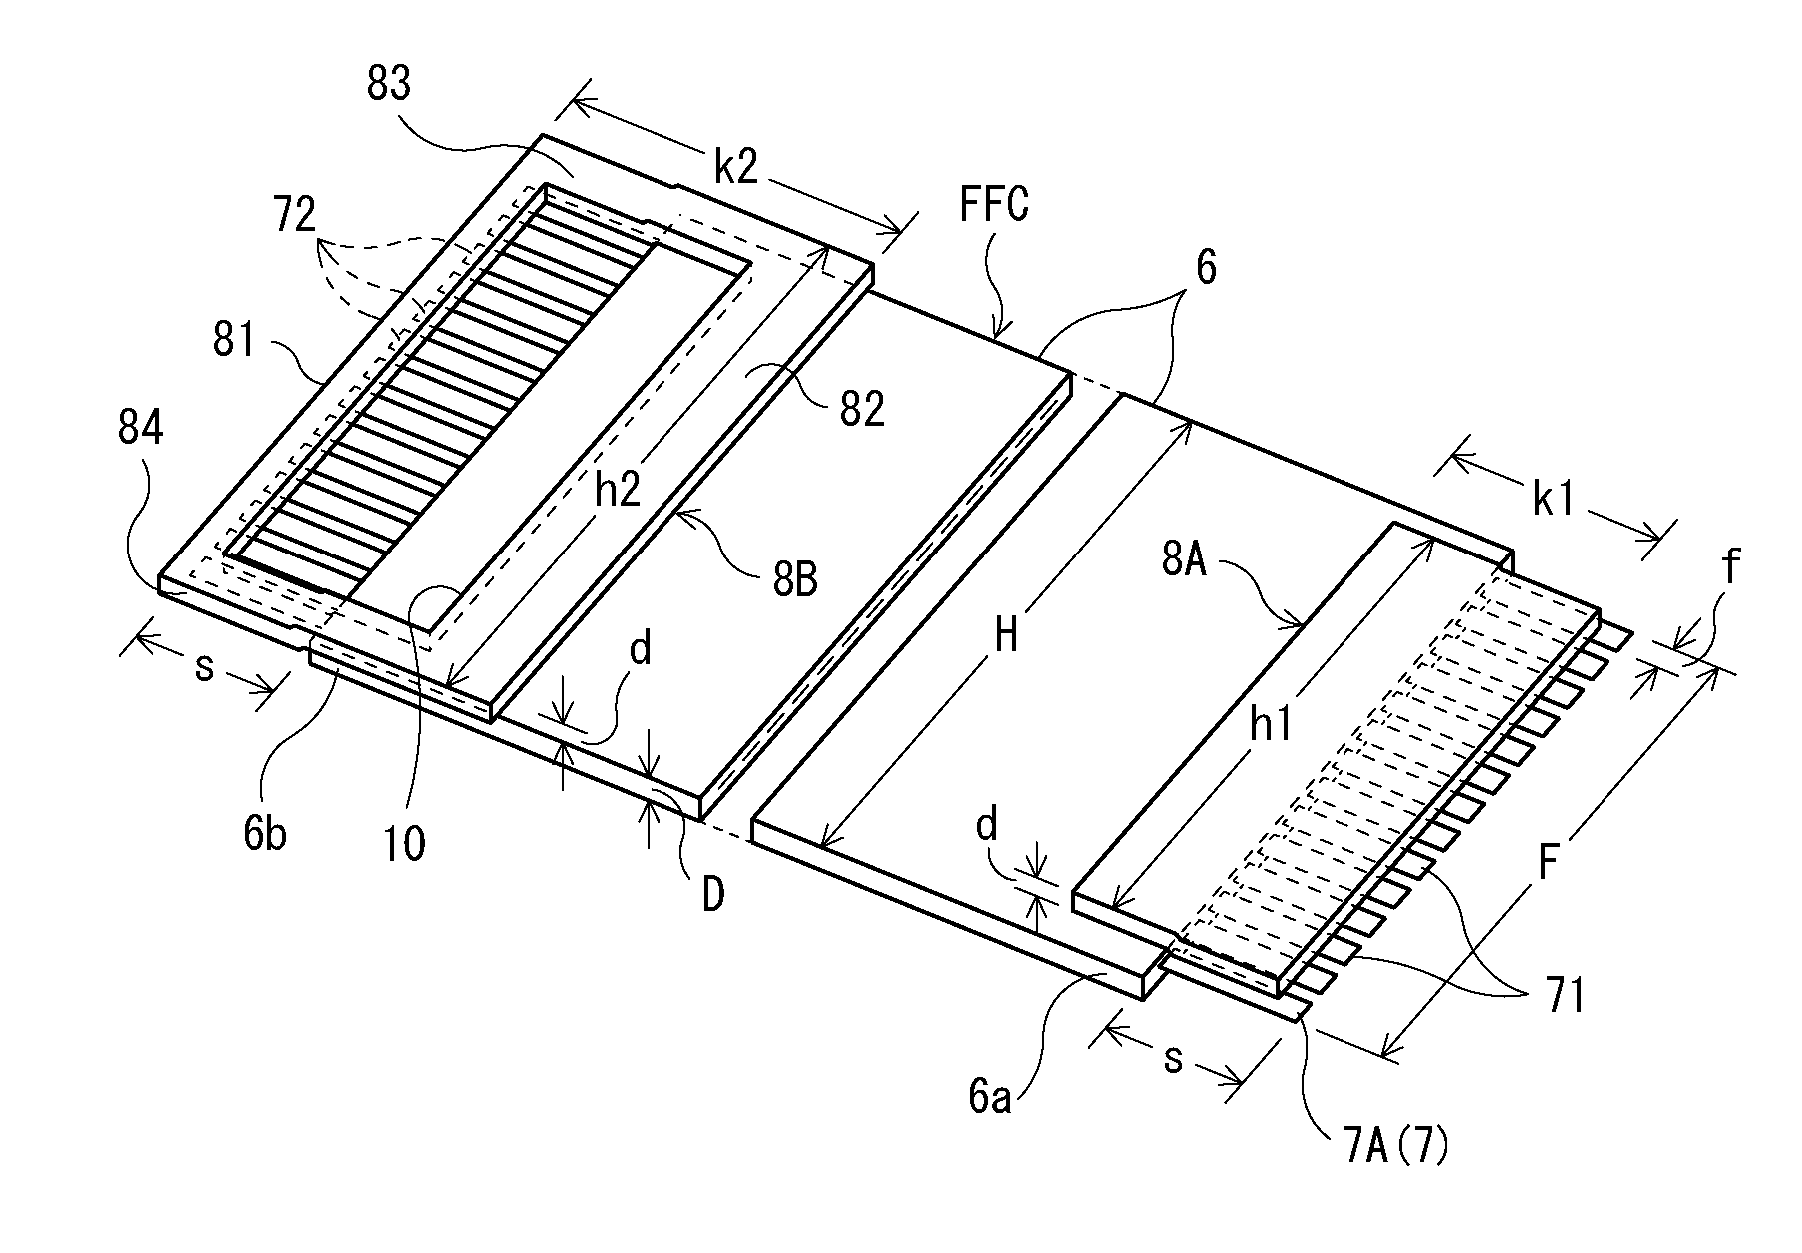 Flexible flat cable, method and apparatus for assembling the same